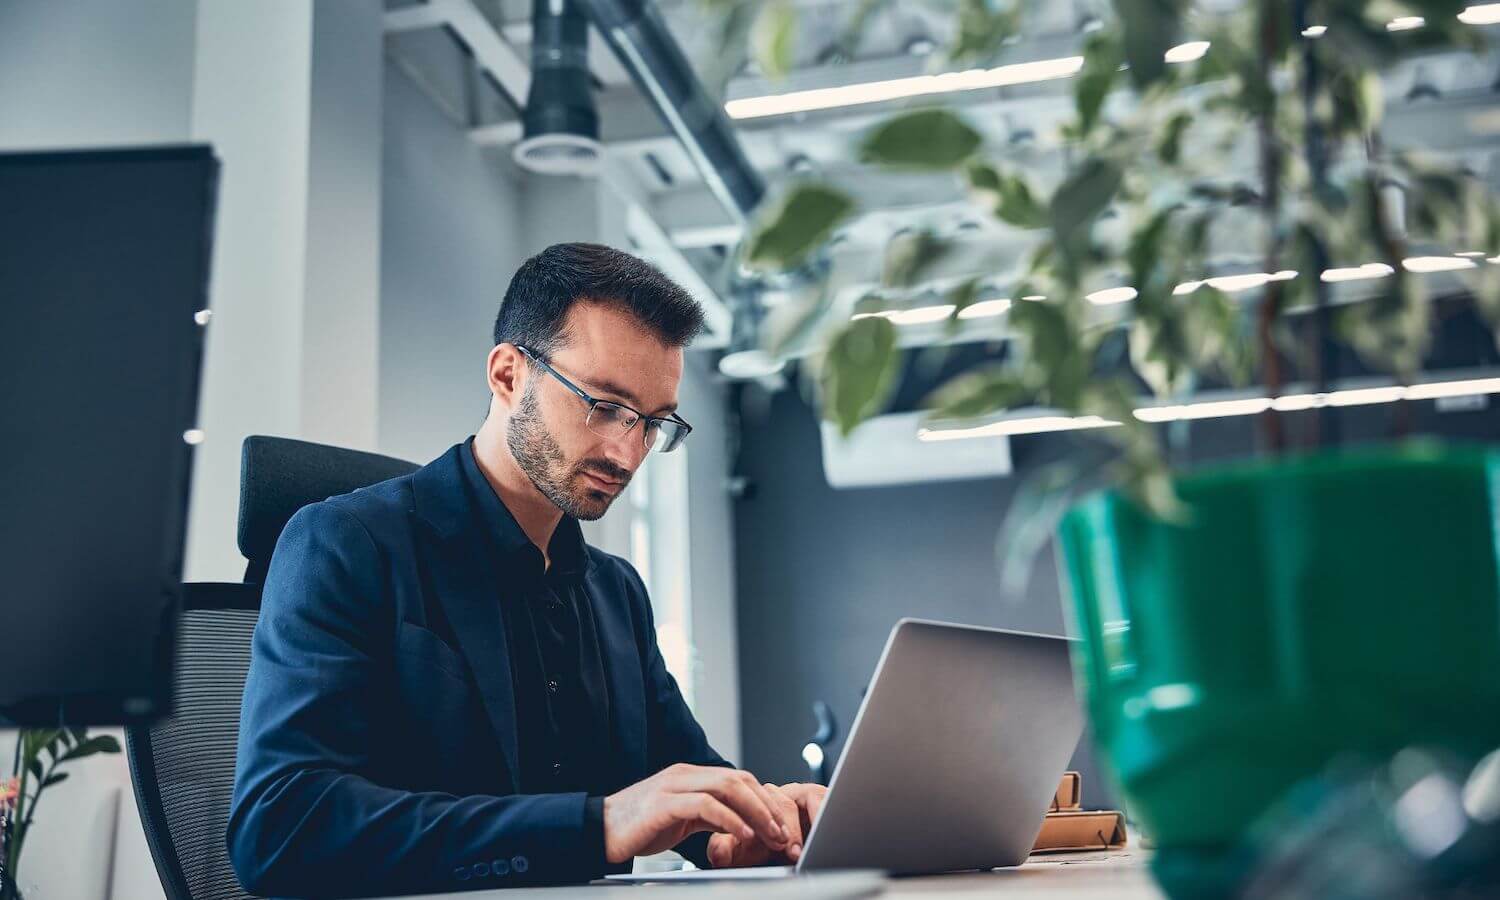 Male typing in office on laptop in front of plant